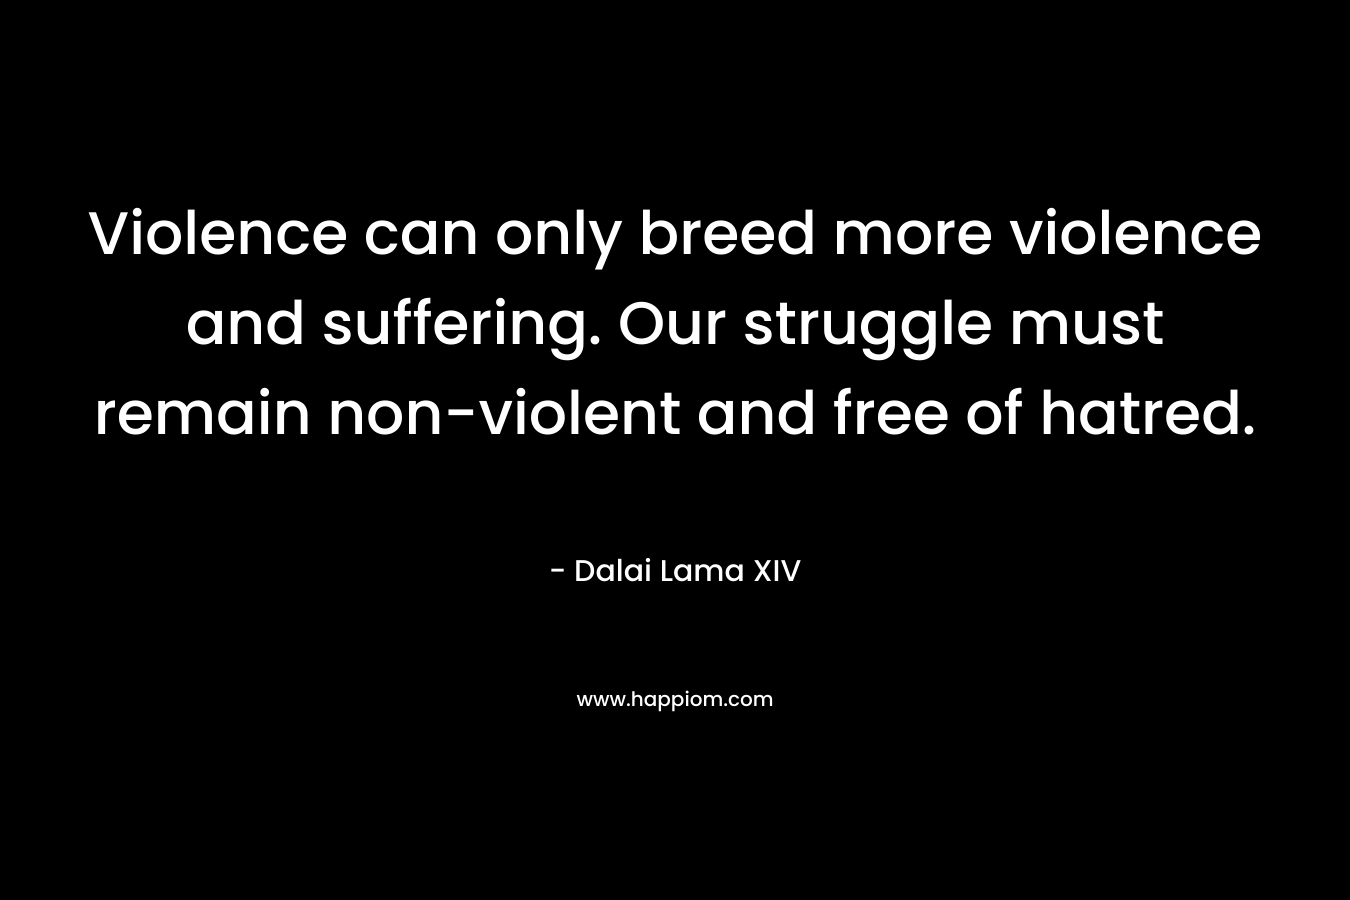 Violence can only breed more violence and suffering. Our struggle must remain non-violent and free of hatred.